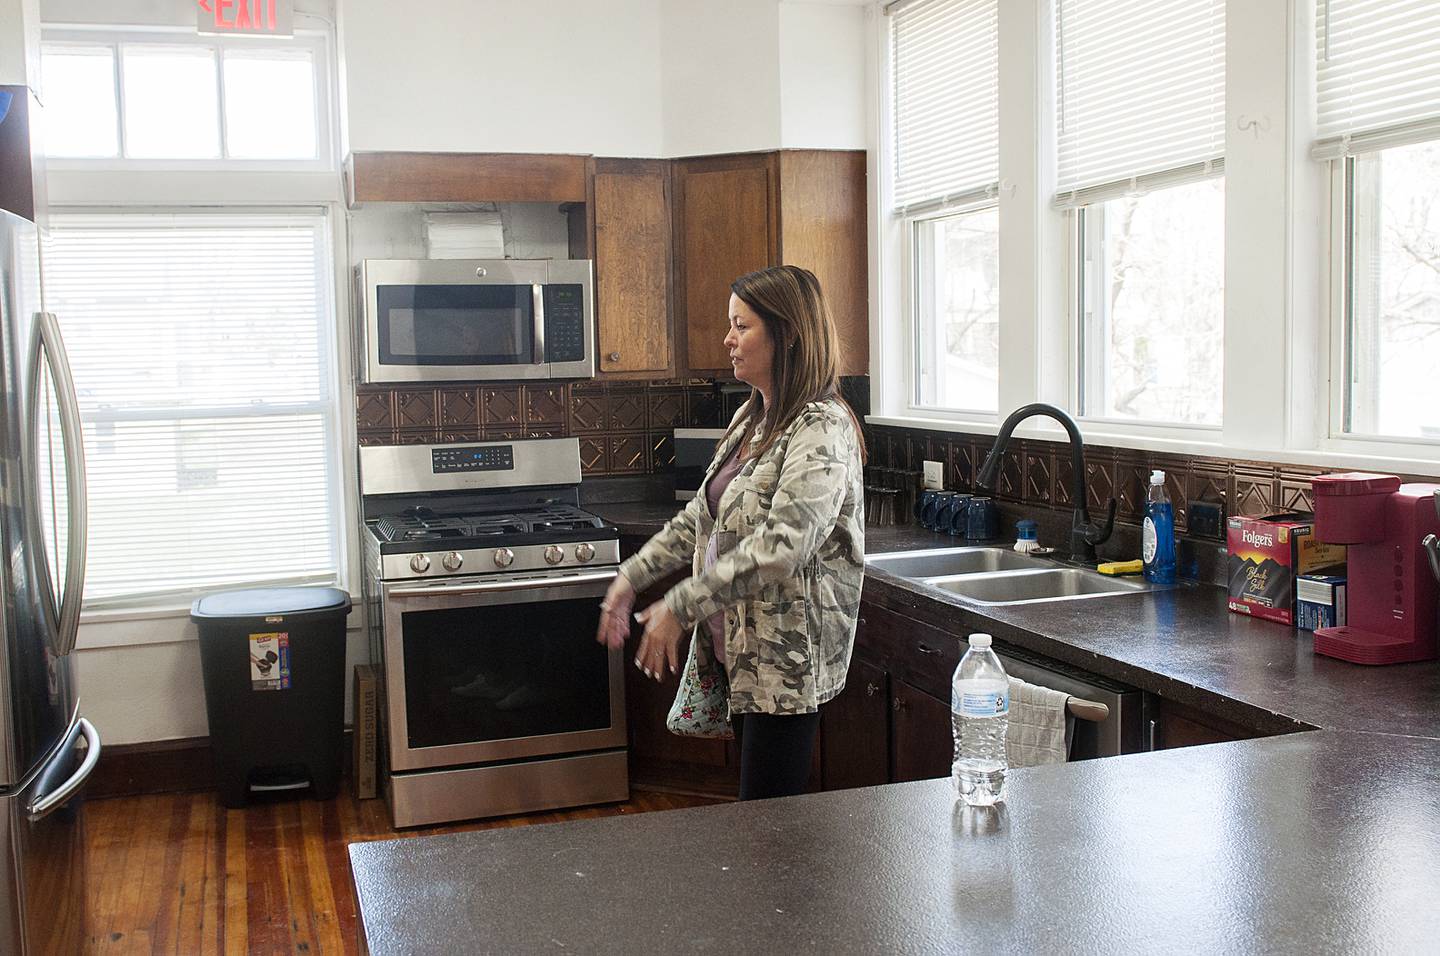 Sarah Kent talks about the kitchen in the home she grew up in during an open house Saturday, April 16, 2022. The home has been converted into a sober living facility by Sauk Valley Voice of Recovery. “I am really excited to see how they have renovated the house.” Kent said